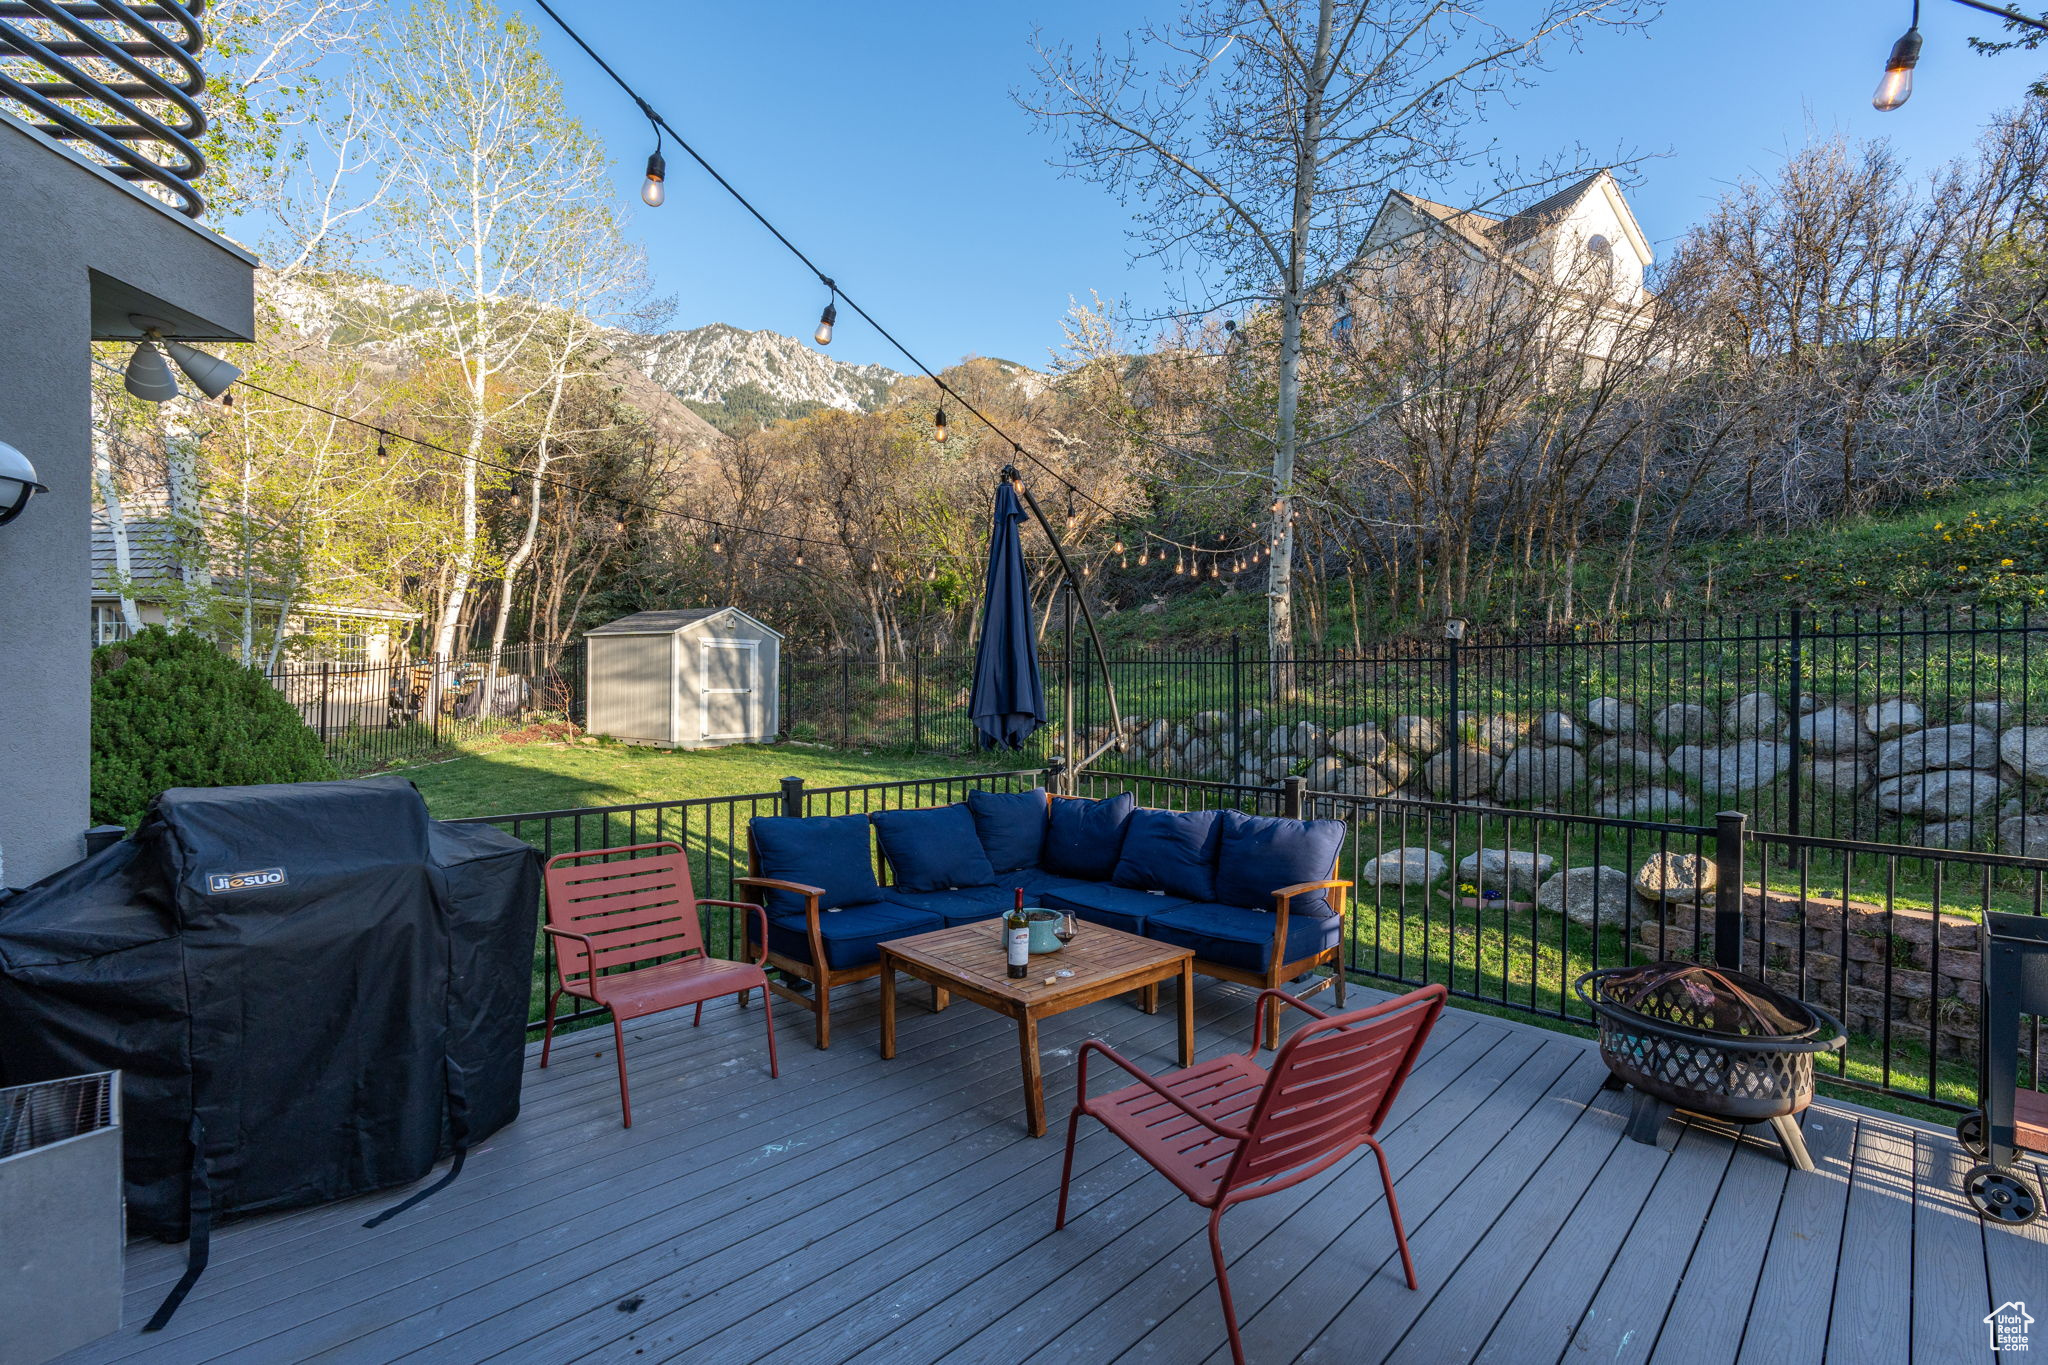 Deck featuring grilling area, an outdoor living space, a mountain view, and a storage shed